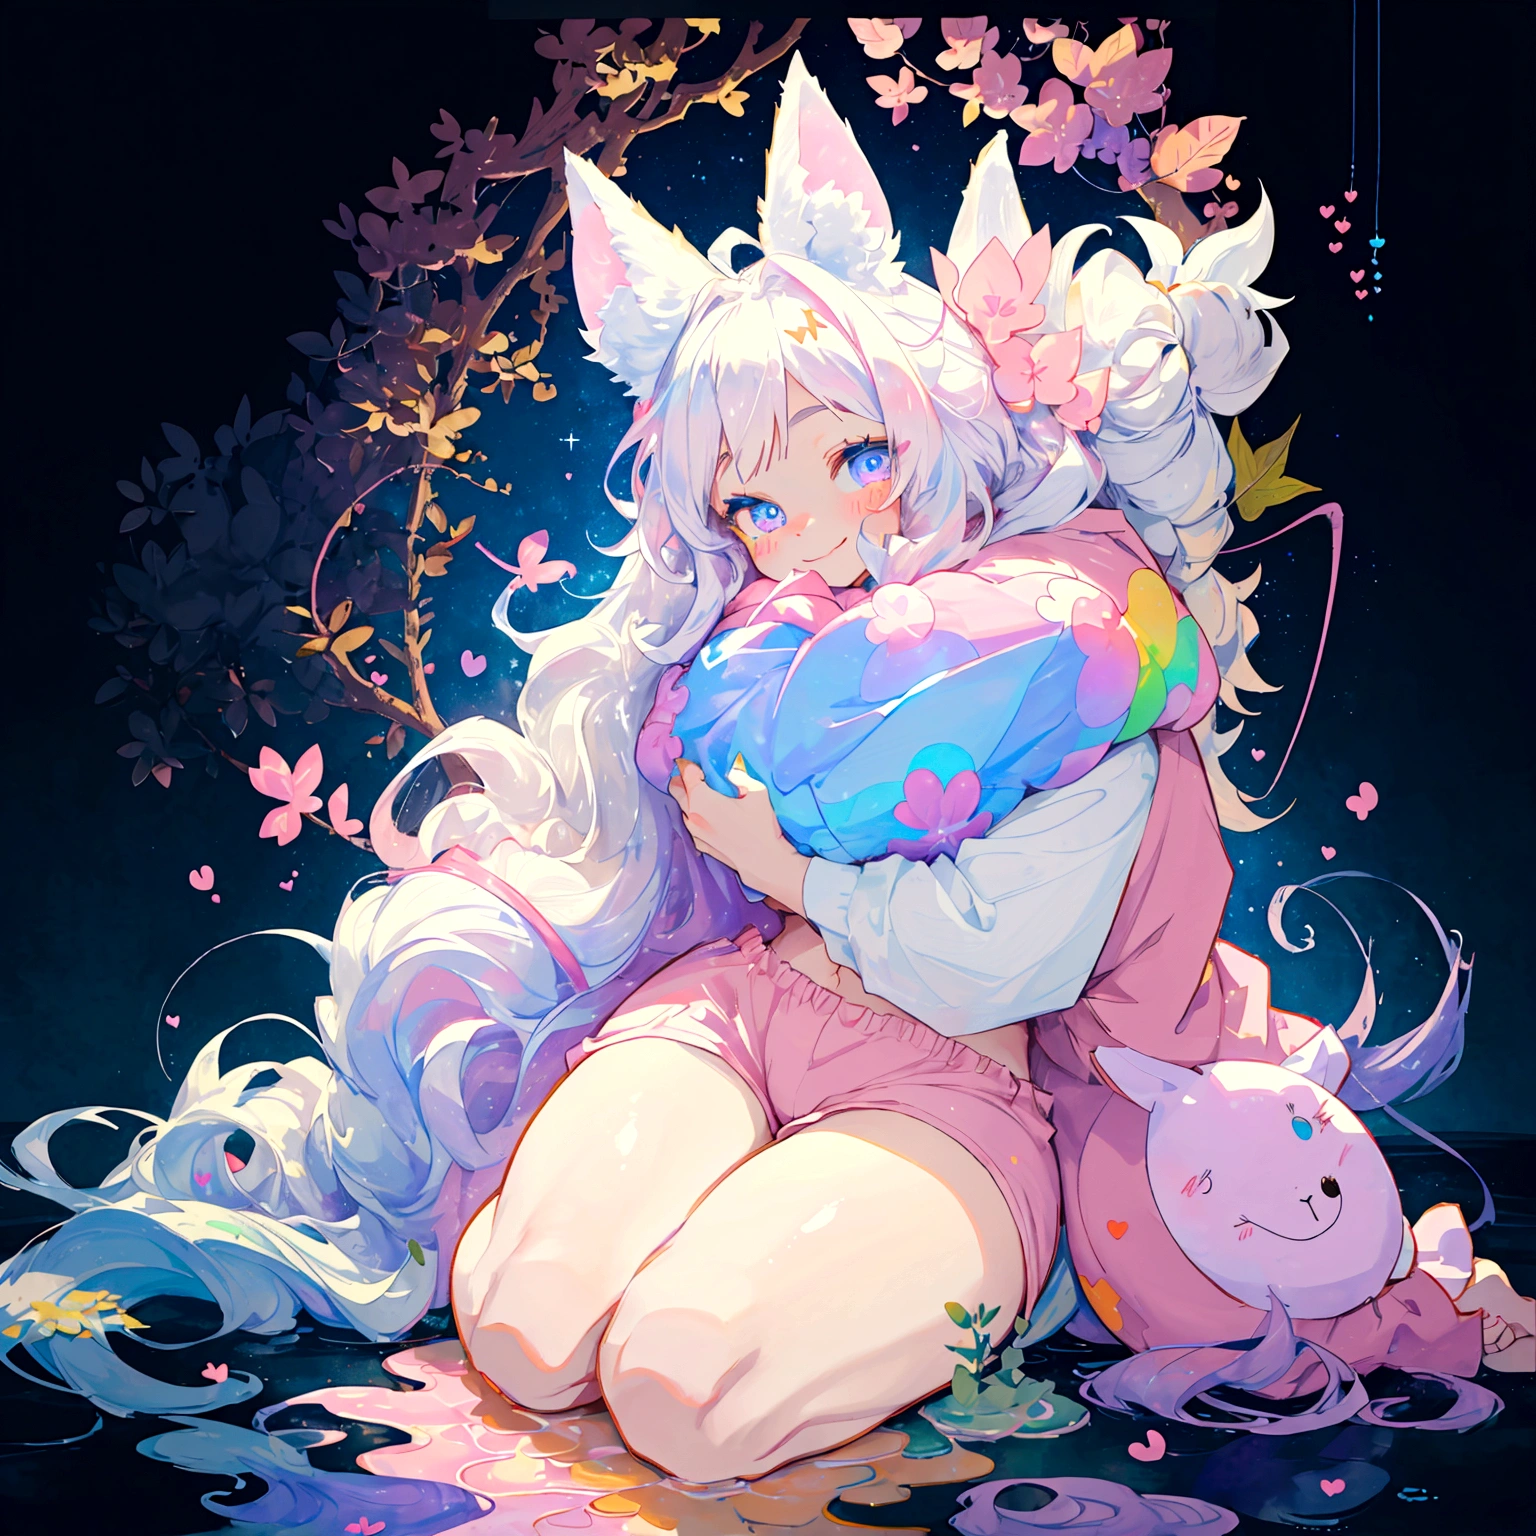 a cute adult male with wolf ears, long white hair, long locks, has a wolf tail, thick thighs, wide hips, short, wearing pink romper with a hood and pink shorts, has heart on shirt, has bunny ears on hood, very slim, showing slender tummy, squishy thighs, has glowing blue eyes. alone, solo (ALONE)(SOLO), surrounded by rainbows, colorful galaxy backround, smiling, on knees ontop of a pile of fluffy plushes, plushies everywhere, kawaii plushies, surrounded by bubbles, surrounded by rainbow leaves, thicc thighs, stretching out, hands covered, hugging plushie